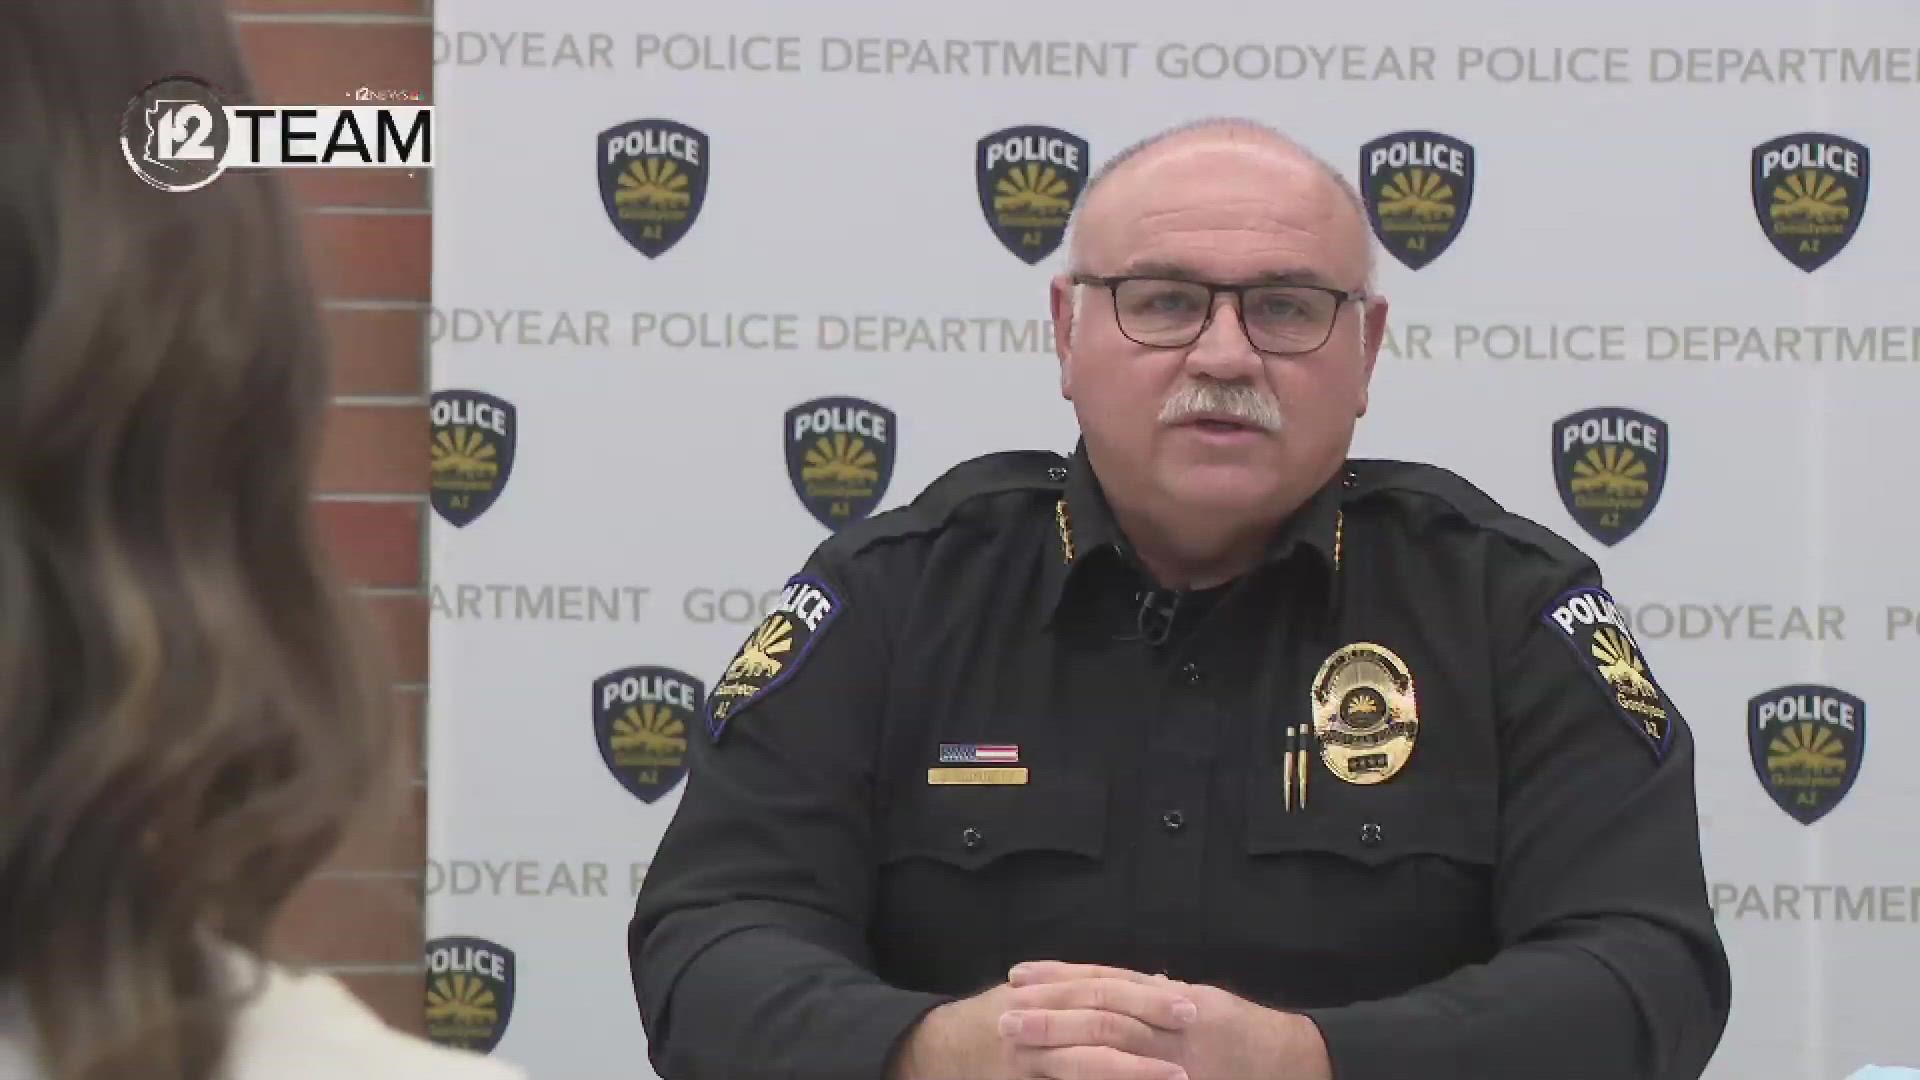 Full interview with Goodyear Police Chief Santiago Rodriguez.